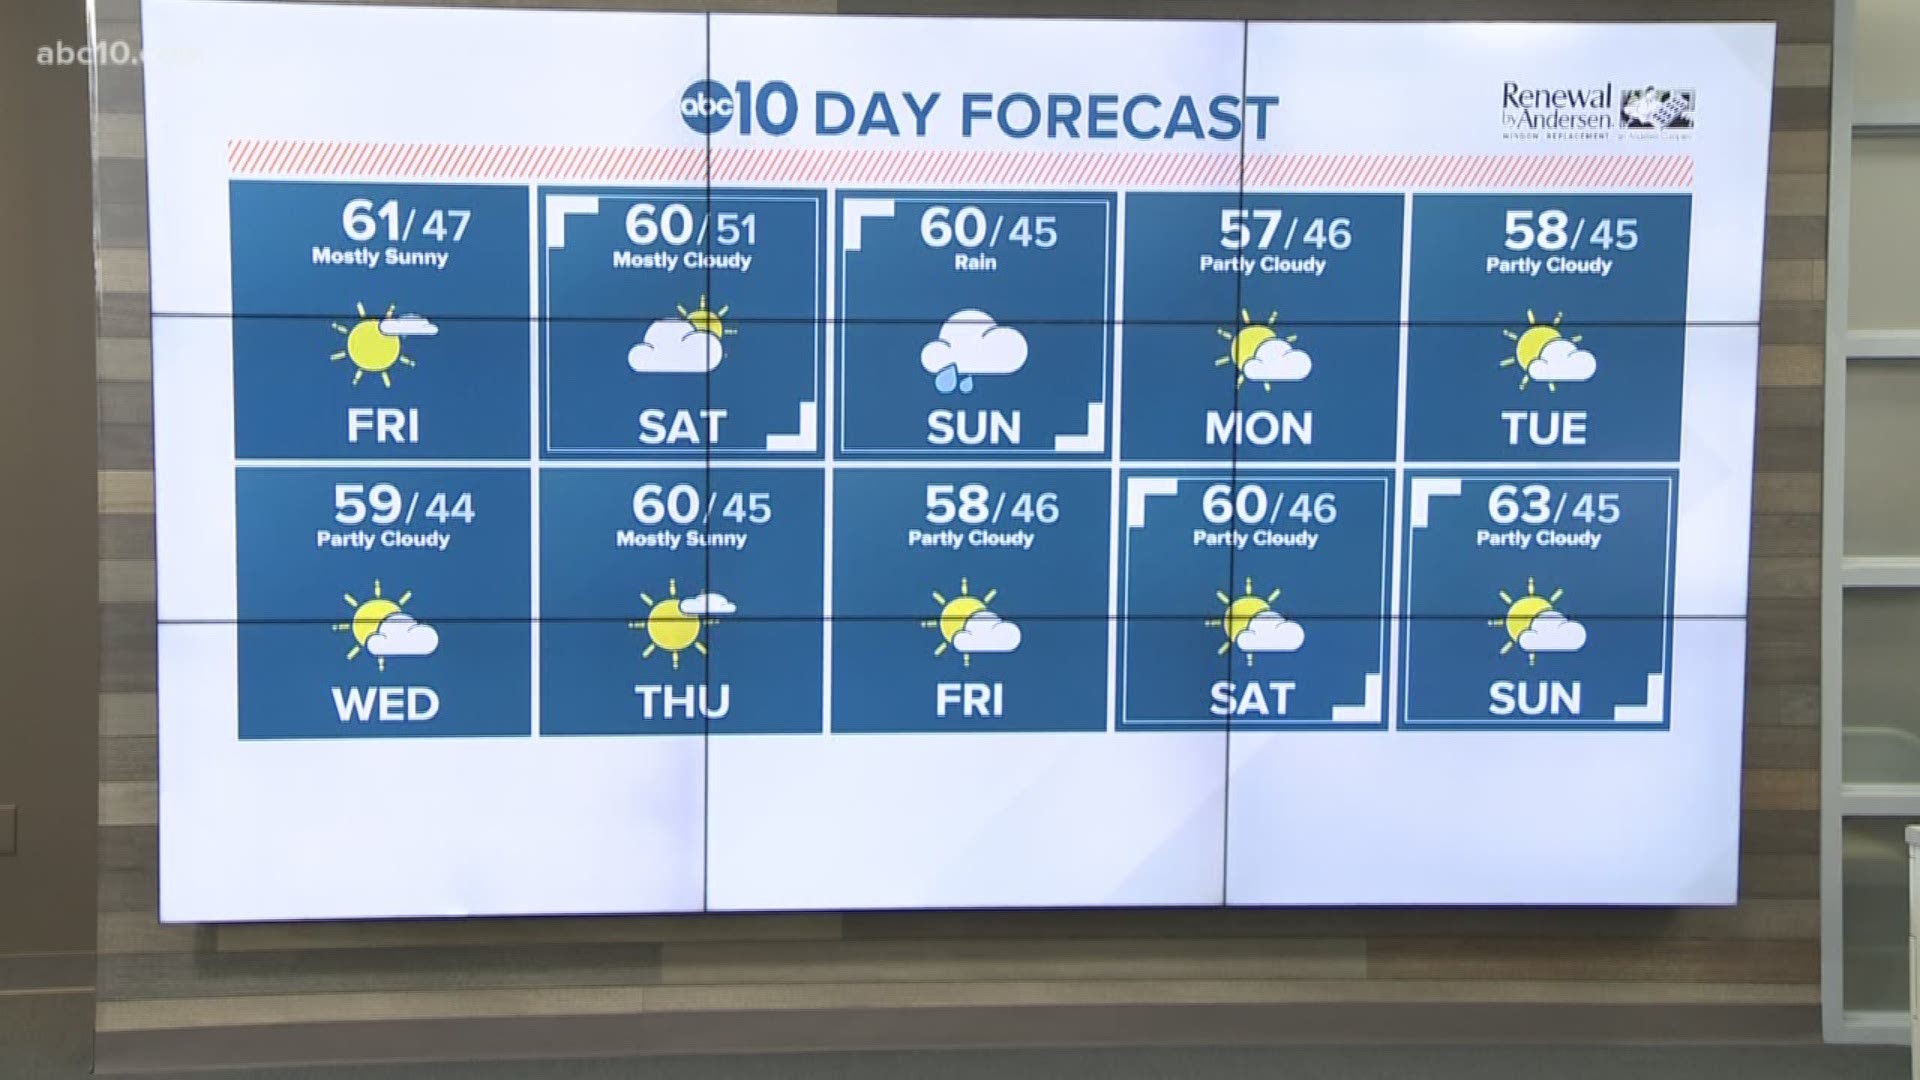 Get the latest forecast from ABC10 on TV, online and on your streaming devices throughout the day.